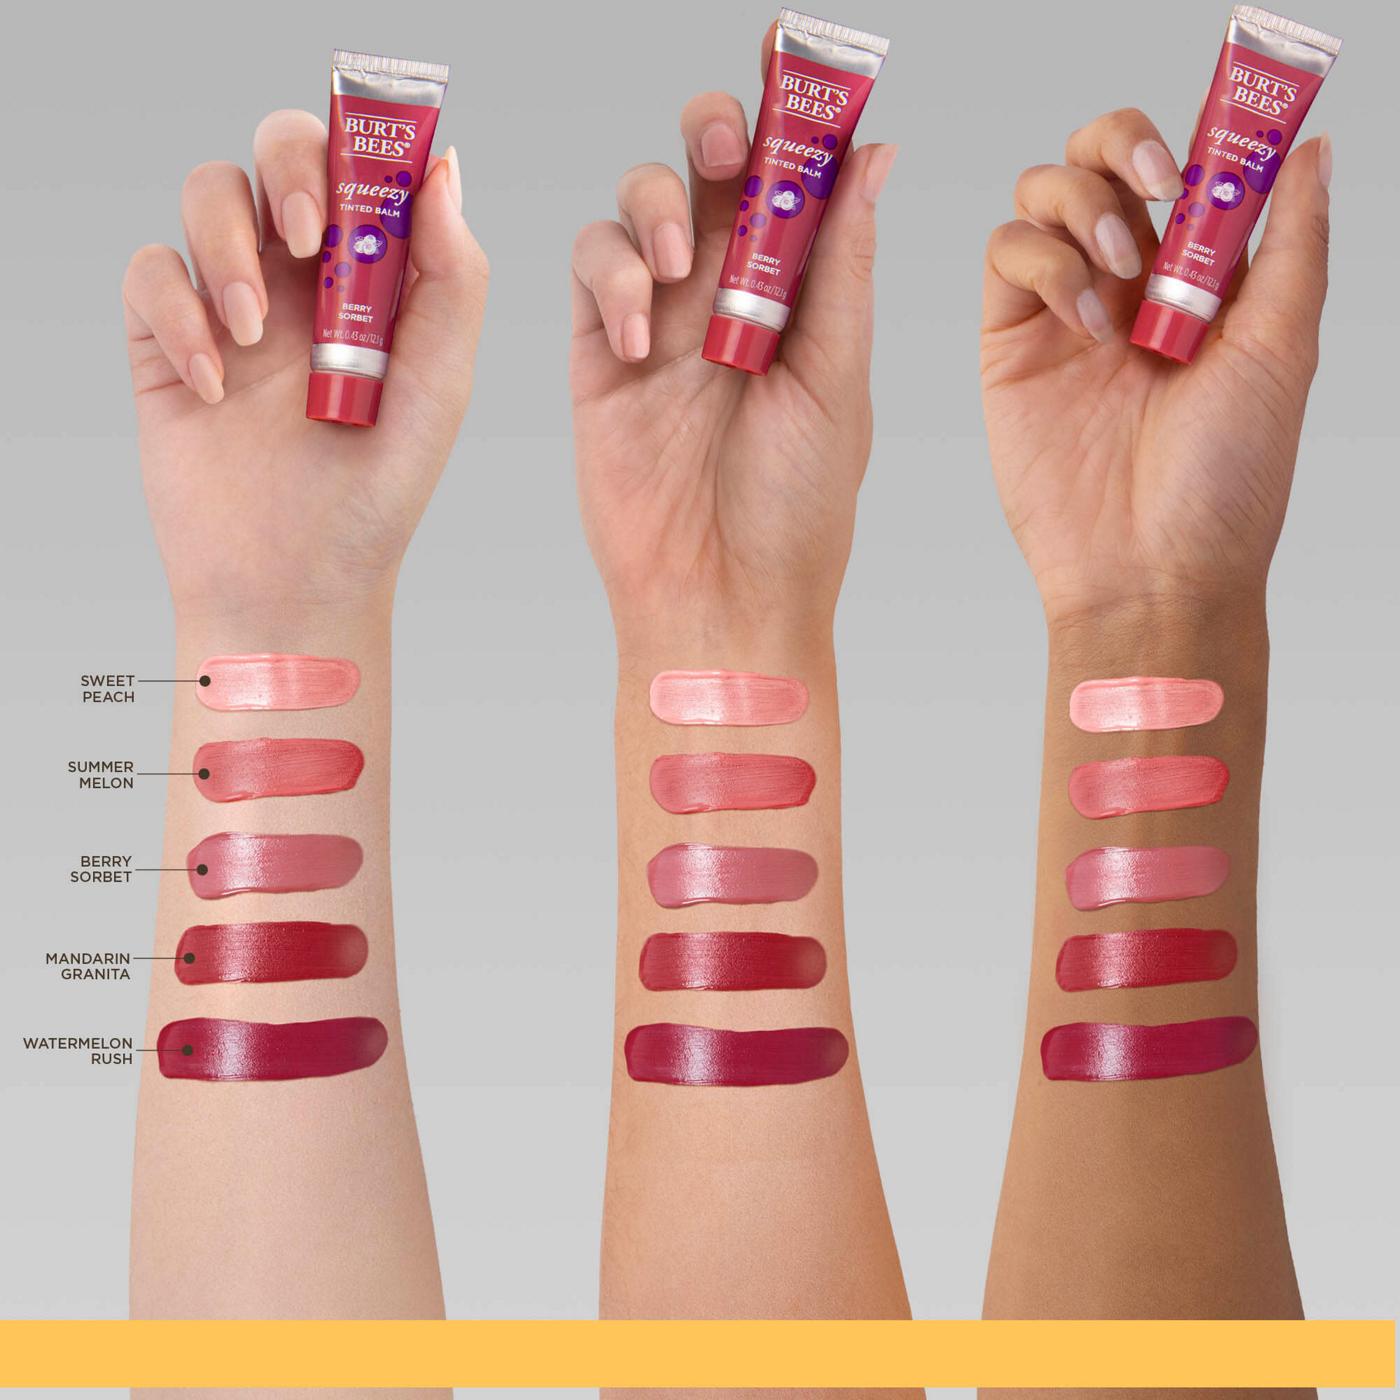 Burt's Bees Squeezy Tinted Lip Balm - Berry Sorbet; image 6 of 10